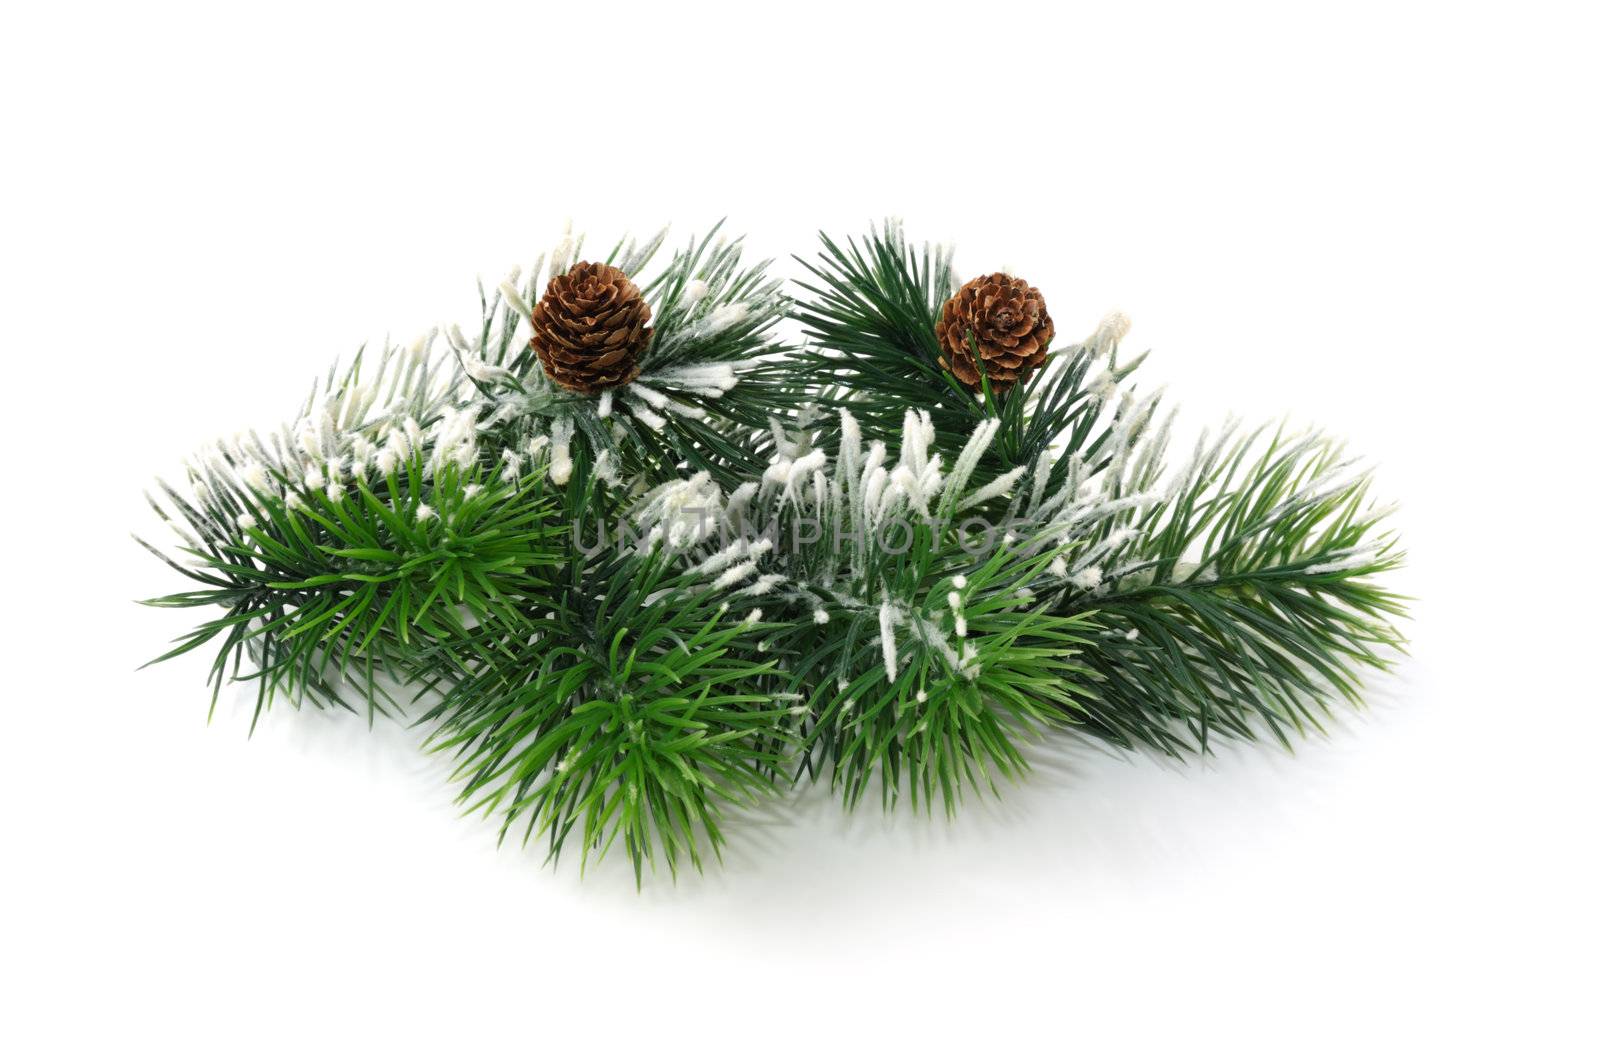 Conifer branch with cones by Apolonia